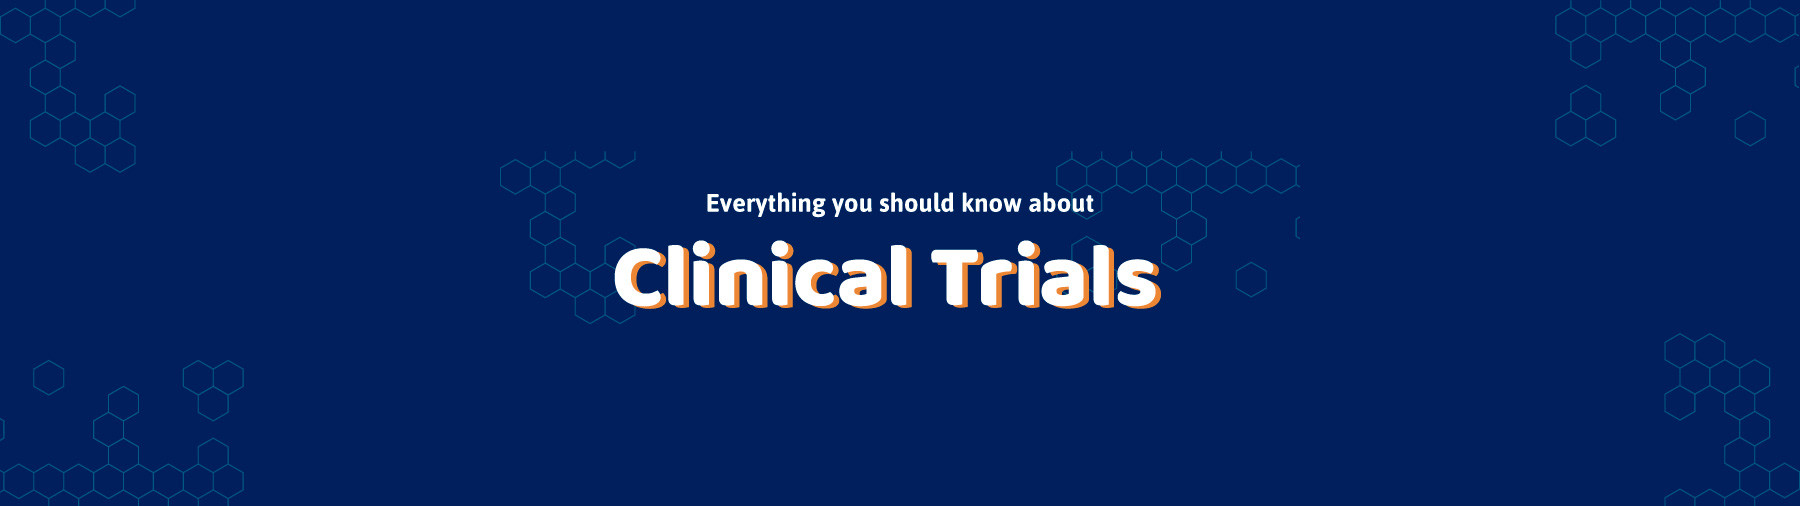 infographic-clinical-trials